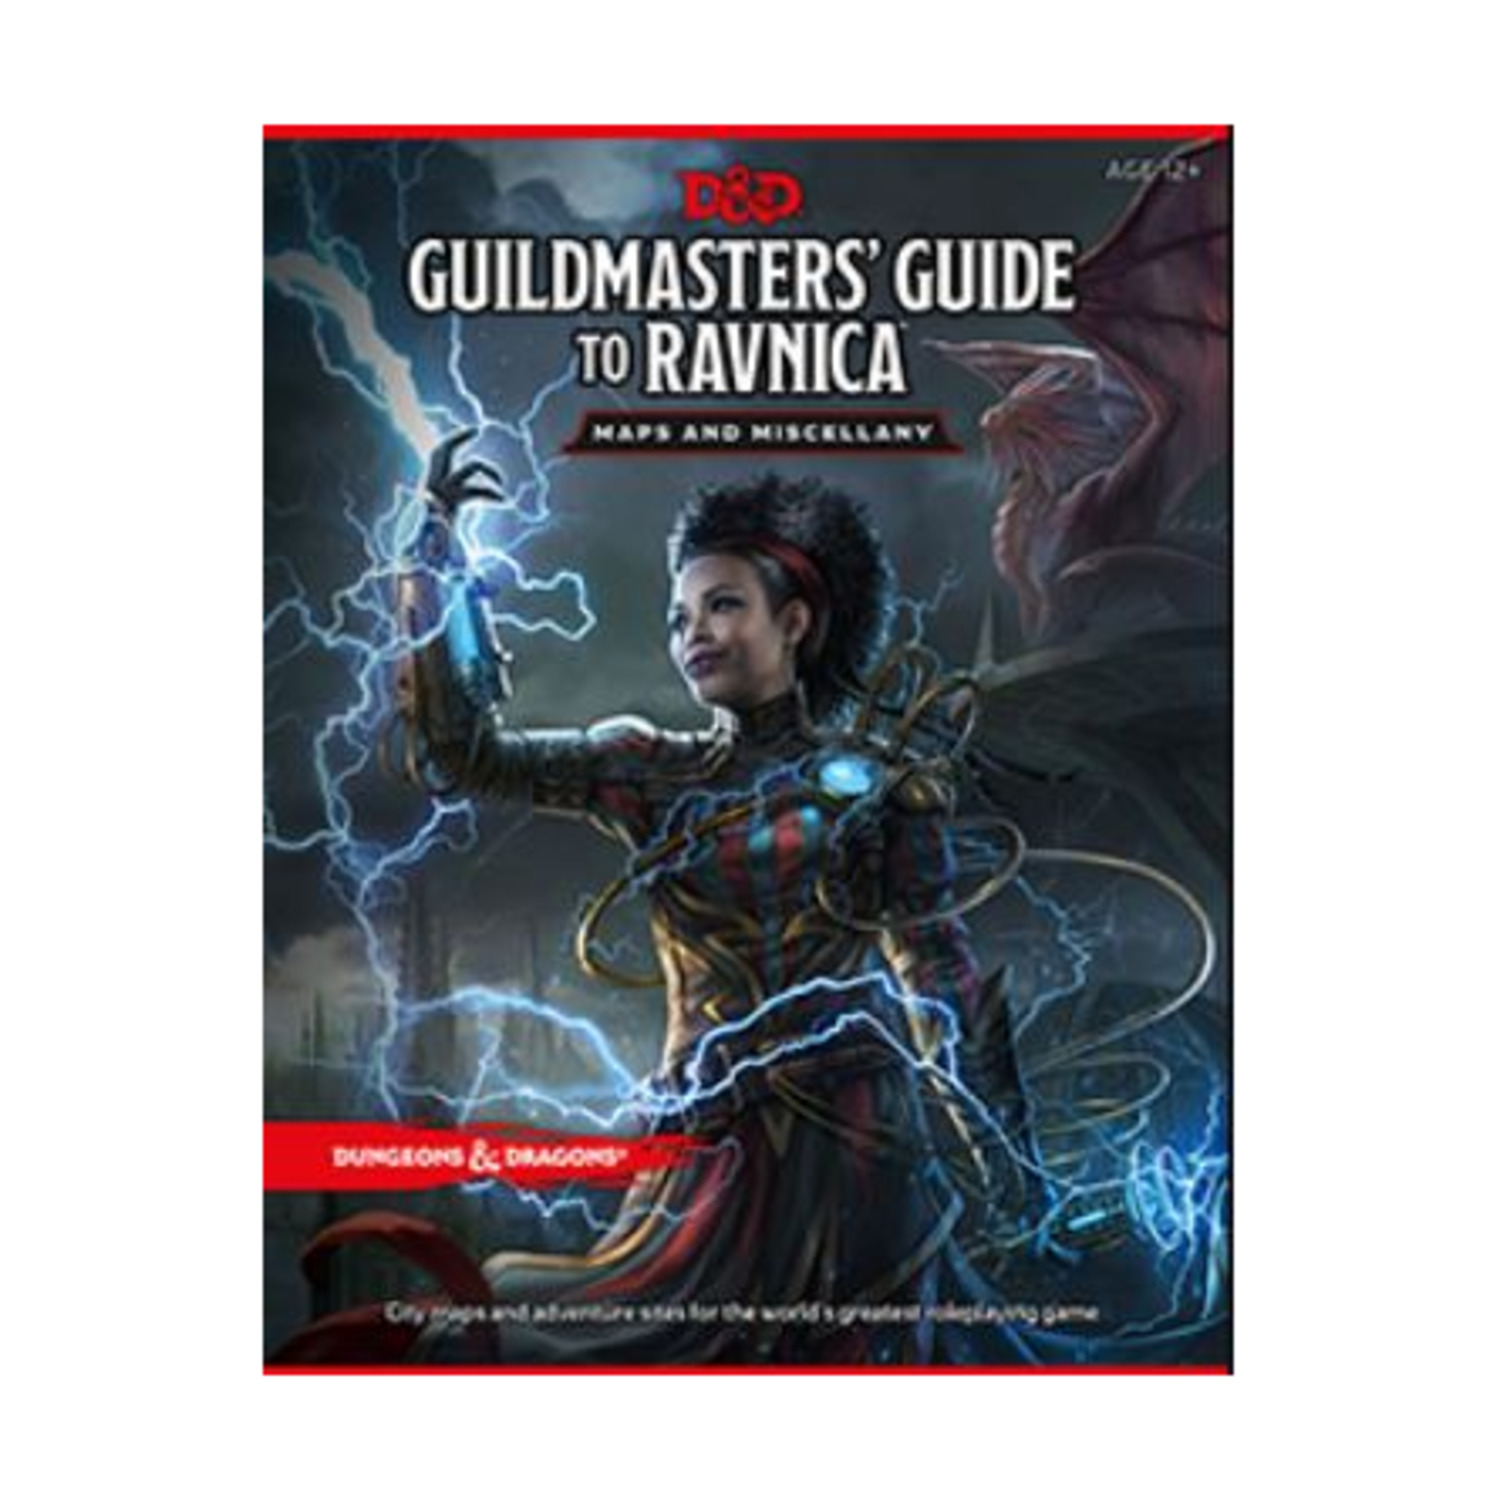 Dungeons & Dragons: Dungeons & Dragons Guildmasters' Guide to Ravnica Maps and Miscellany (D&D/Magic: The Gathering Accessory) (Other) - image 1 of 3